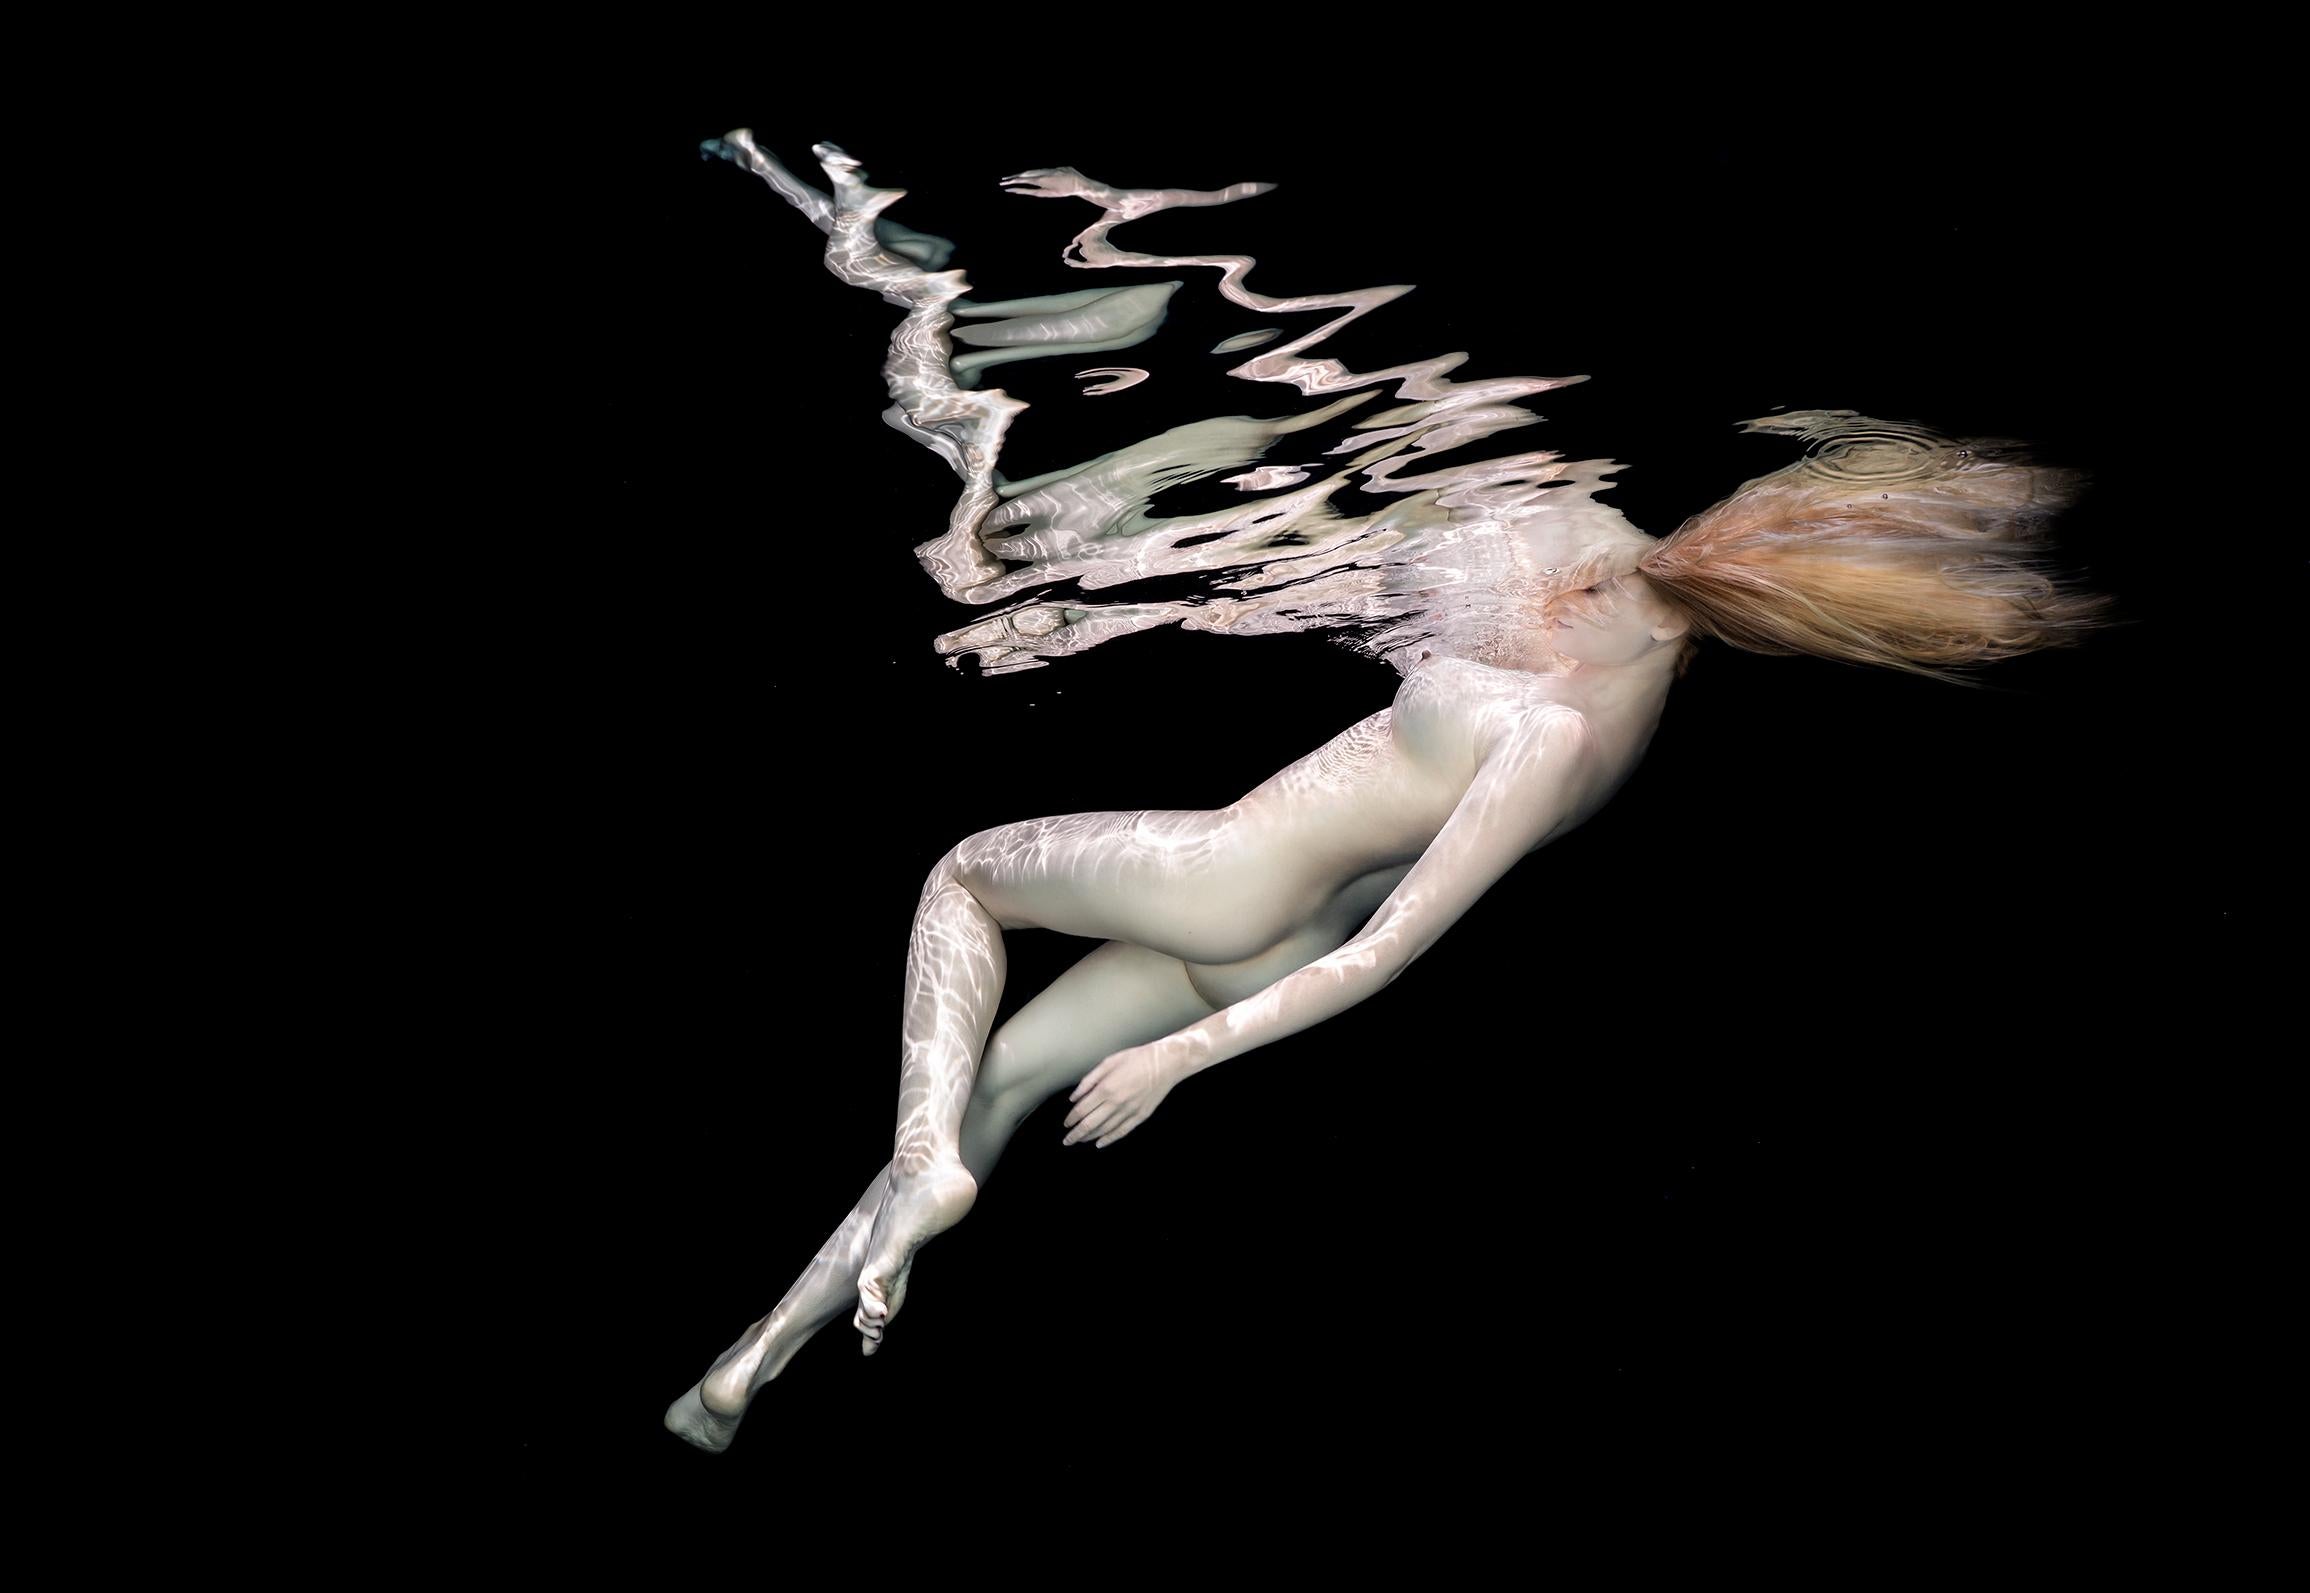 Alex Sher Nude Photograph - Porcelain III - underwater nude photograph - archival pigment print 35" x 52"